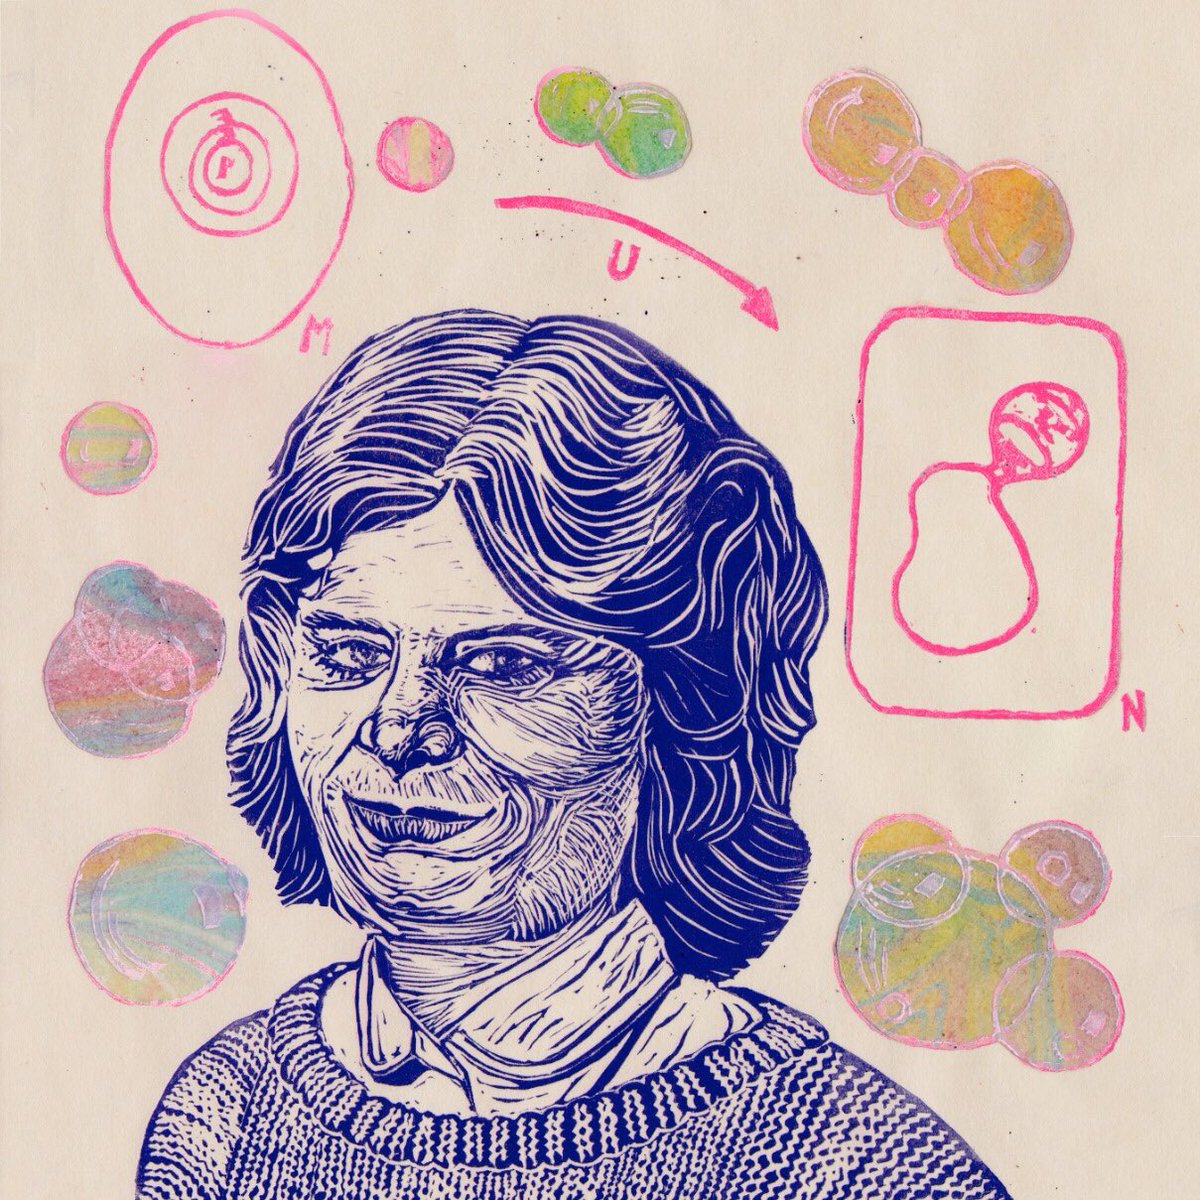 Happy birthday to #mathematician Karen Keskulla Uhlenbeck (b. 1942), a founder of modern geometric analysis & winner of 2019 Abel Prize for “her pioneering achievements in geometric partial differential equations, gauge theory, & integrable systems, & for the fundamental impact